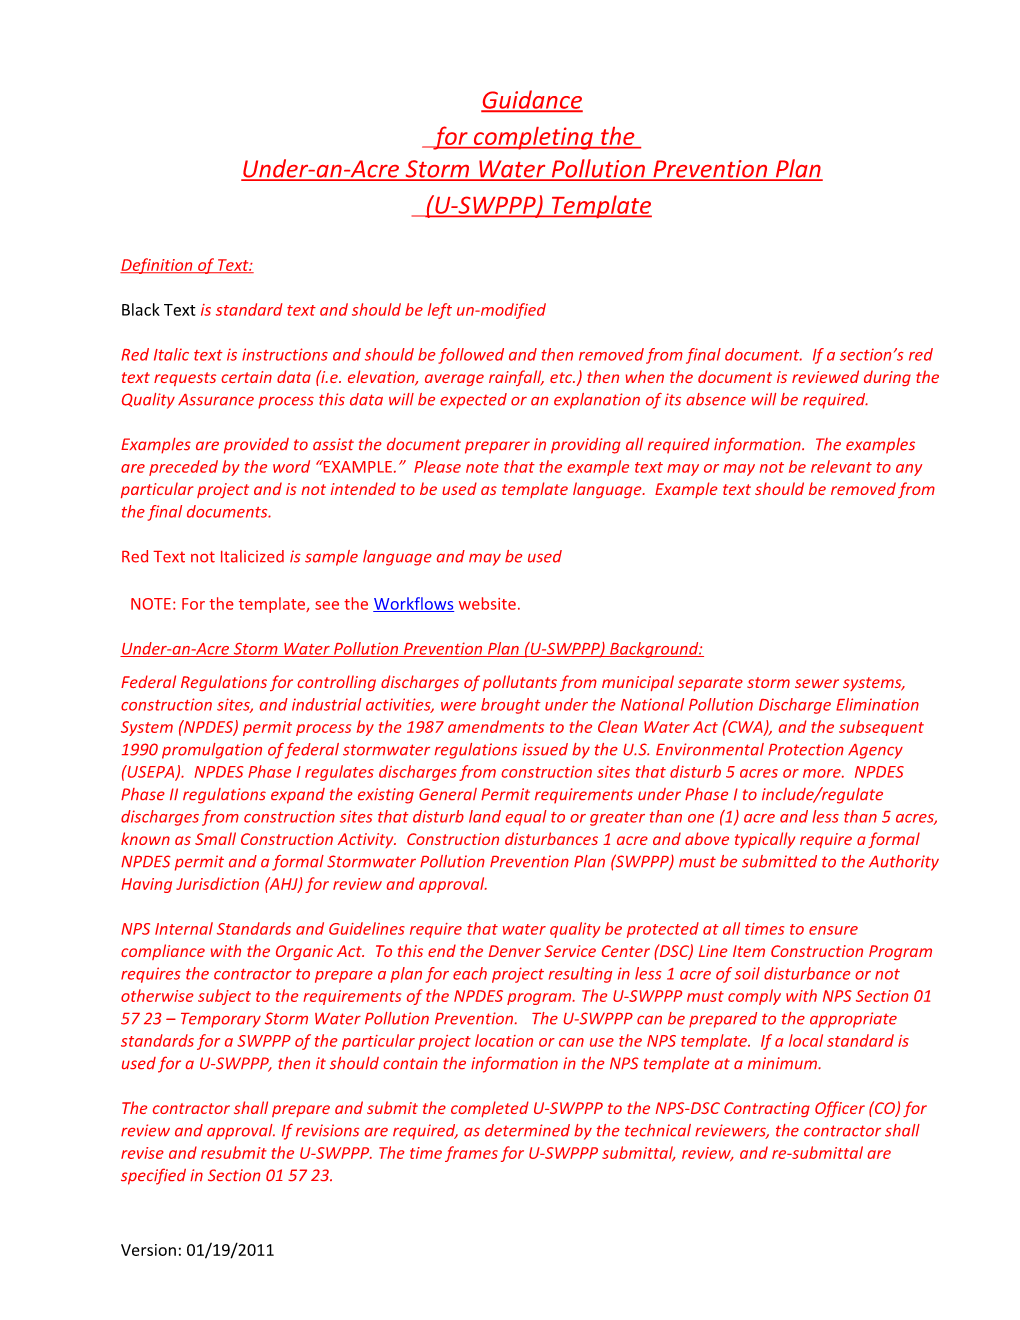 Under-An-Acre Storm Water Pollution Prevention Plan (U-SWPPP) Guideline